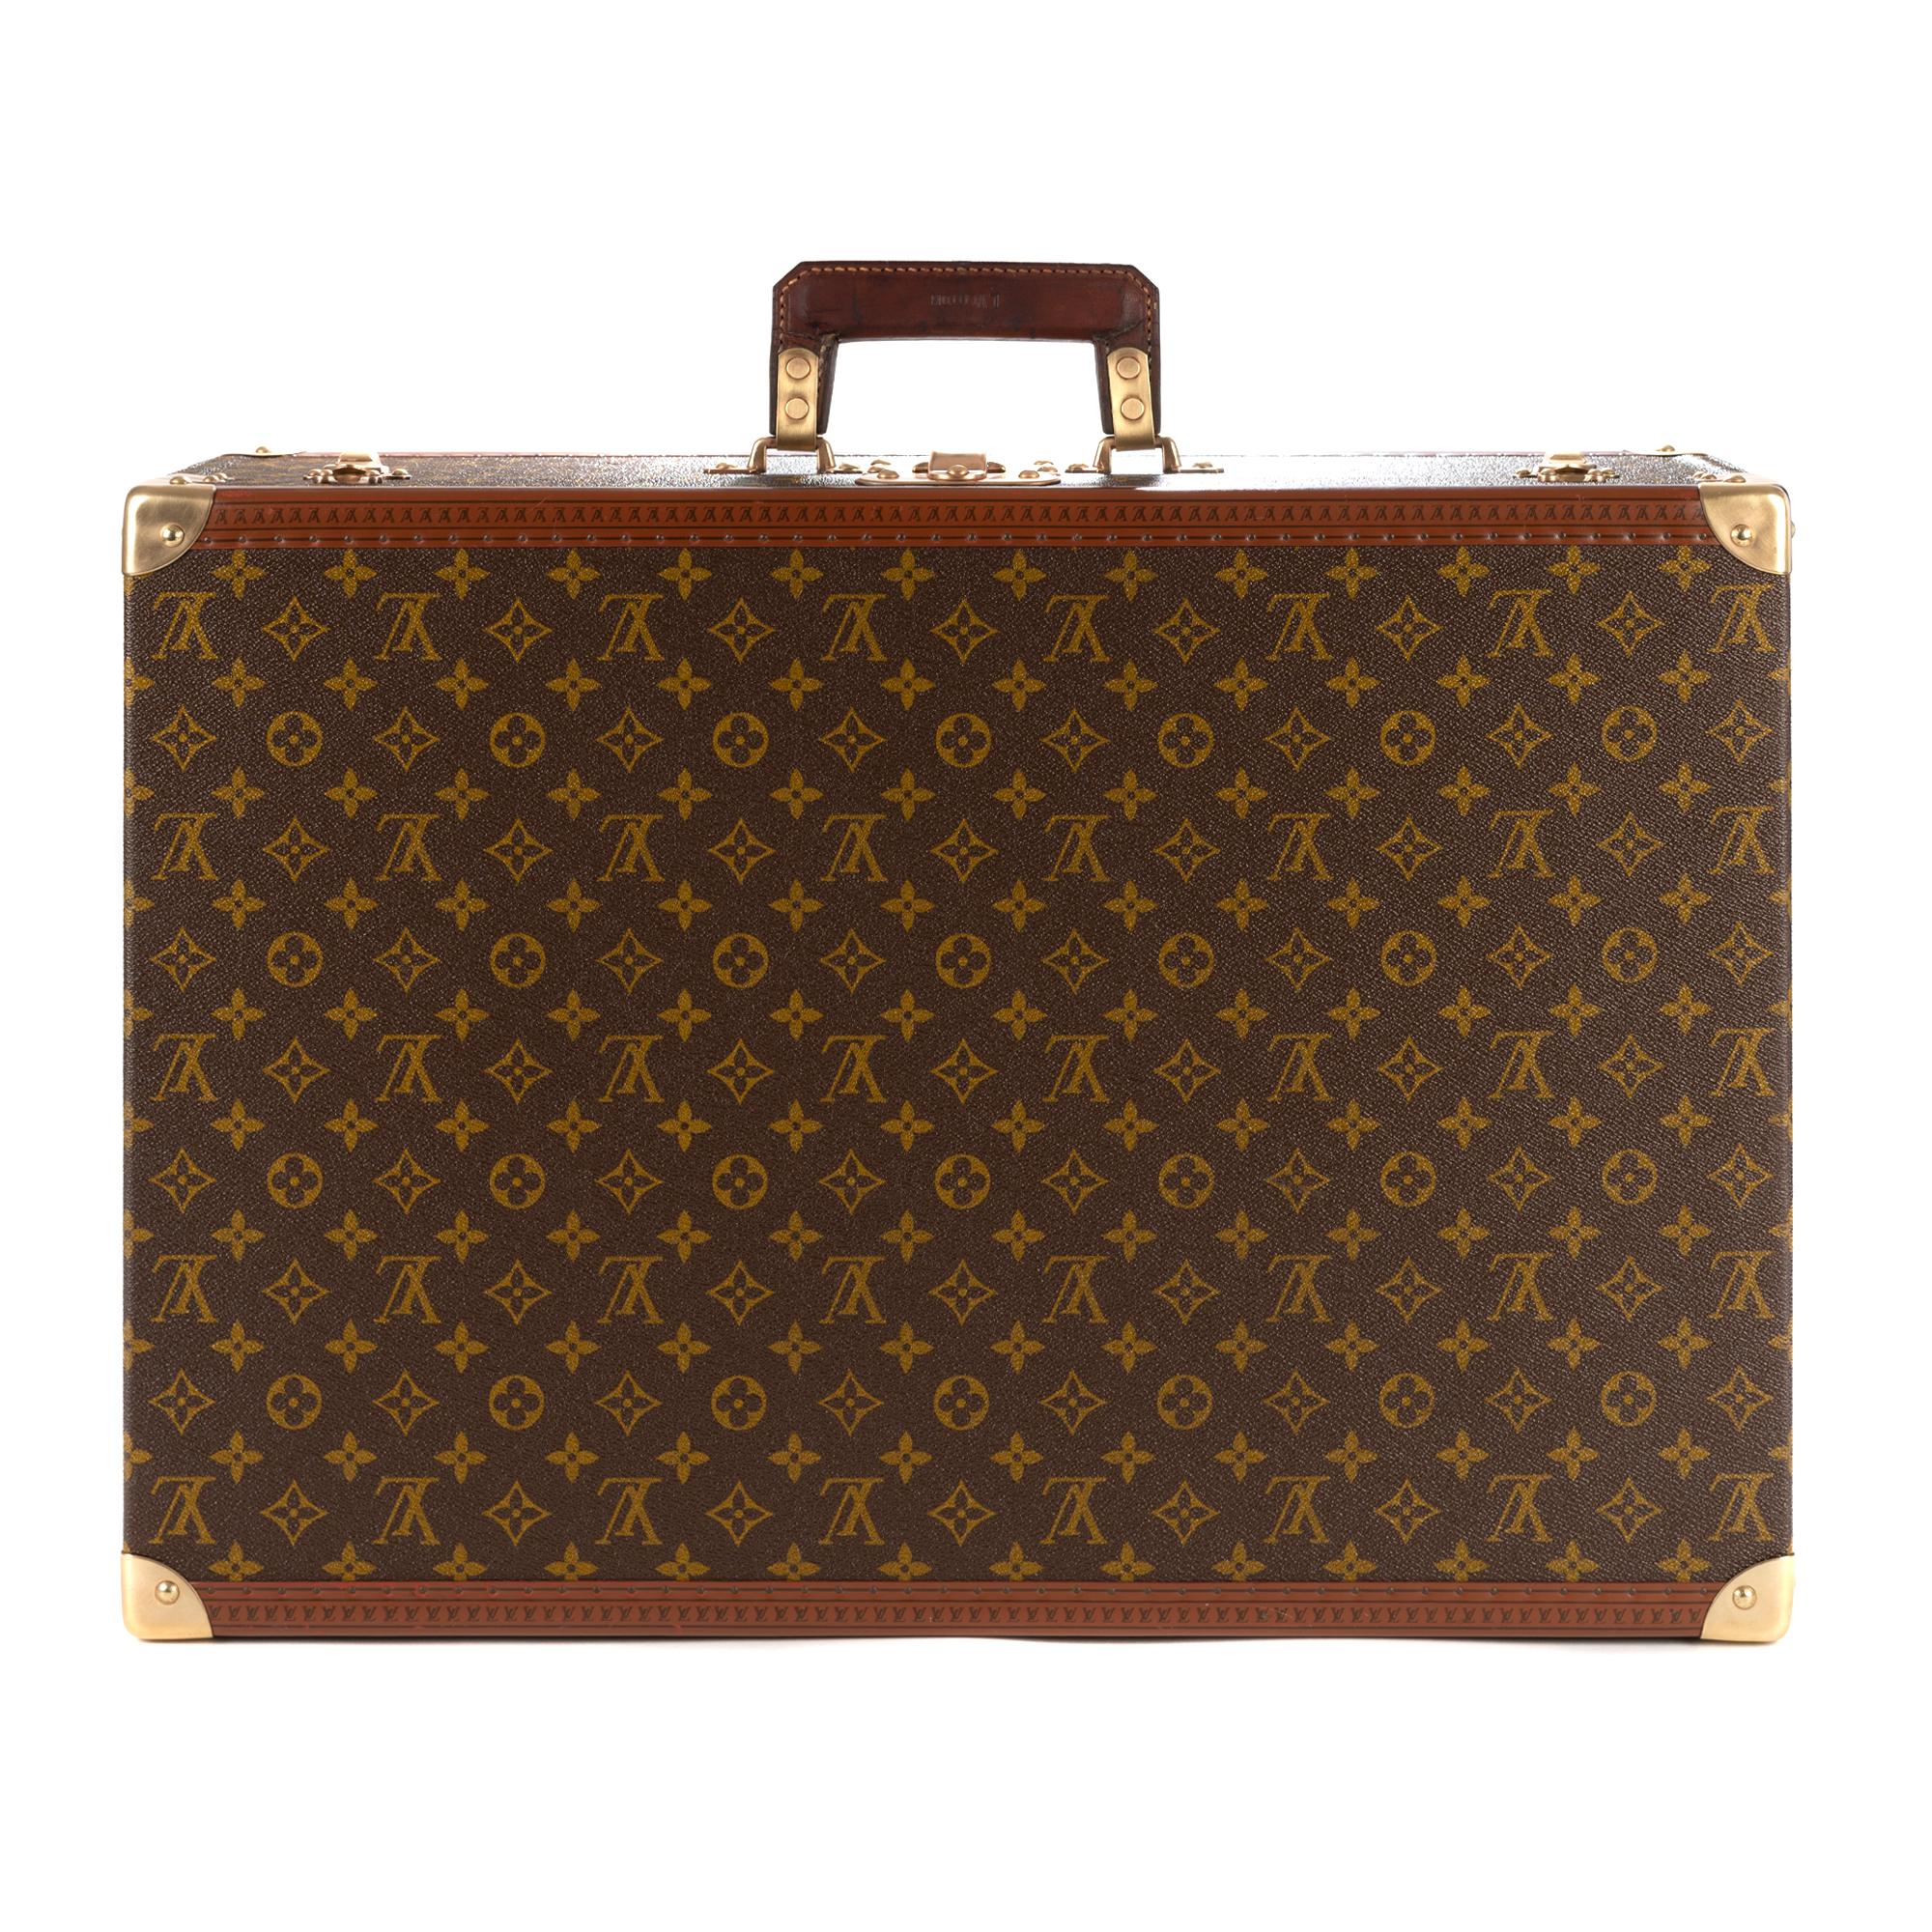 Louis Vuitton Bisten 60 hard case in brown monogram canvas and natural leather, brass trim, natural leather handle allowing a handheld.

Brass lock closure.
Inner lining in beige vuittonite, two straps to hold clothes.
Signature: 